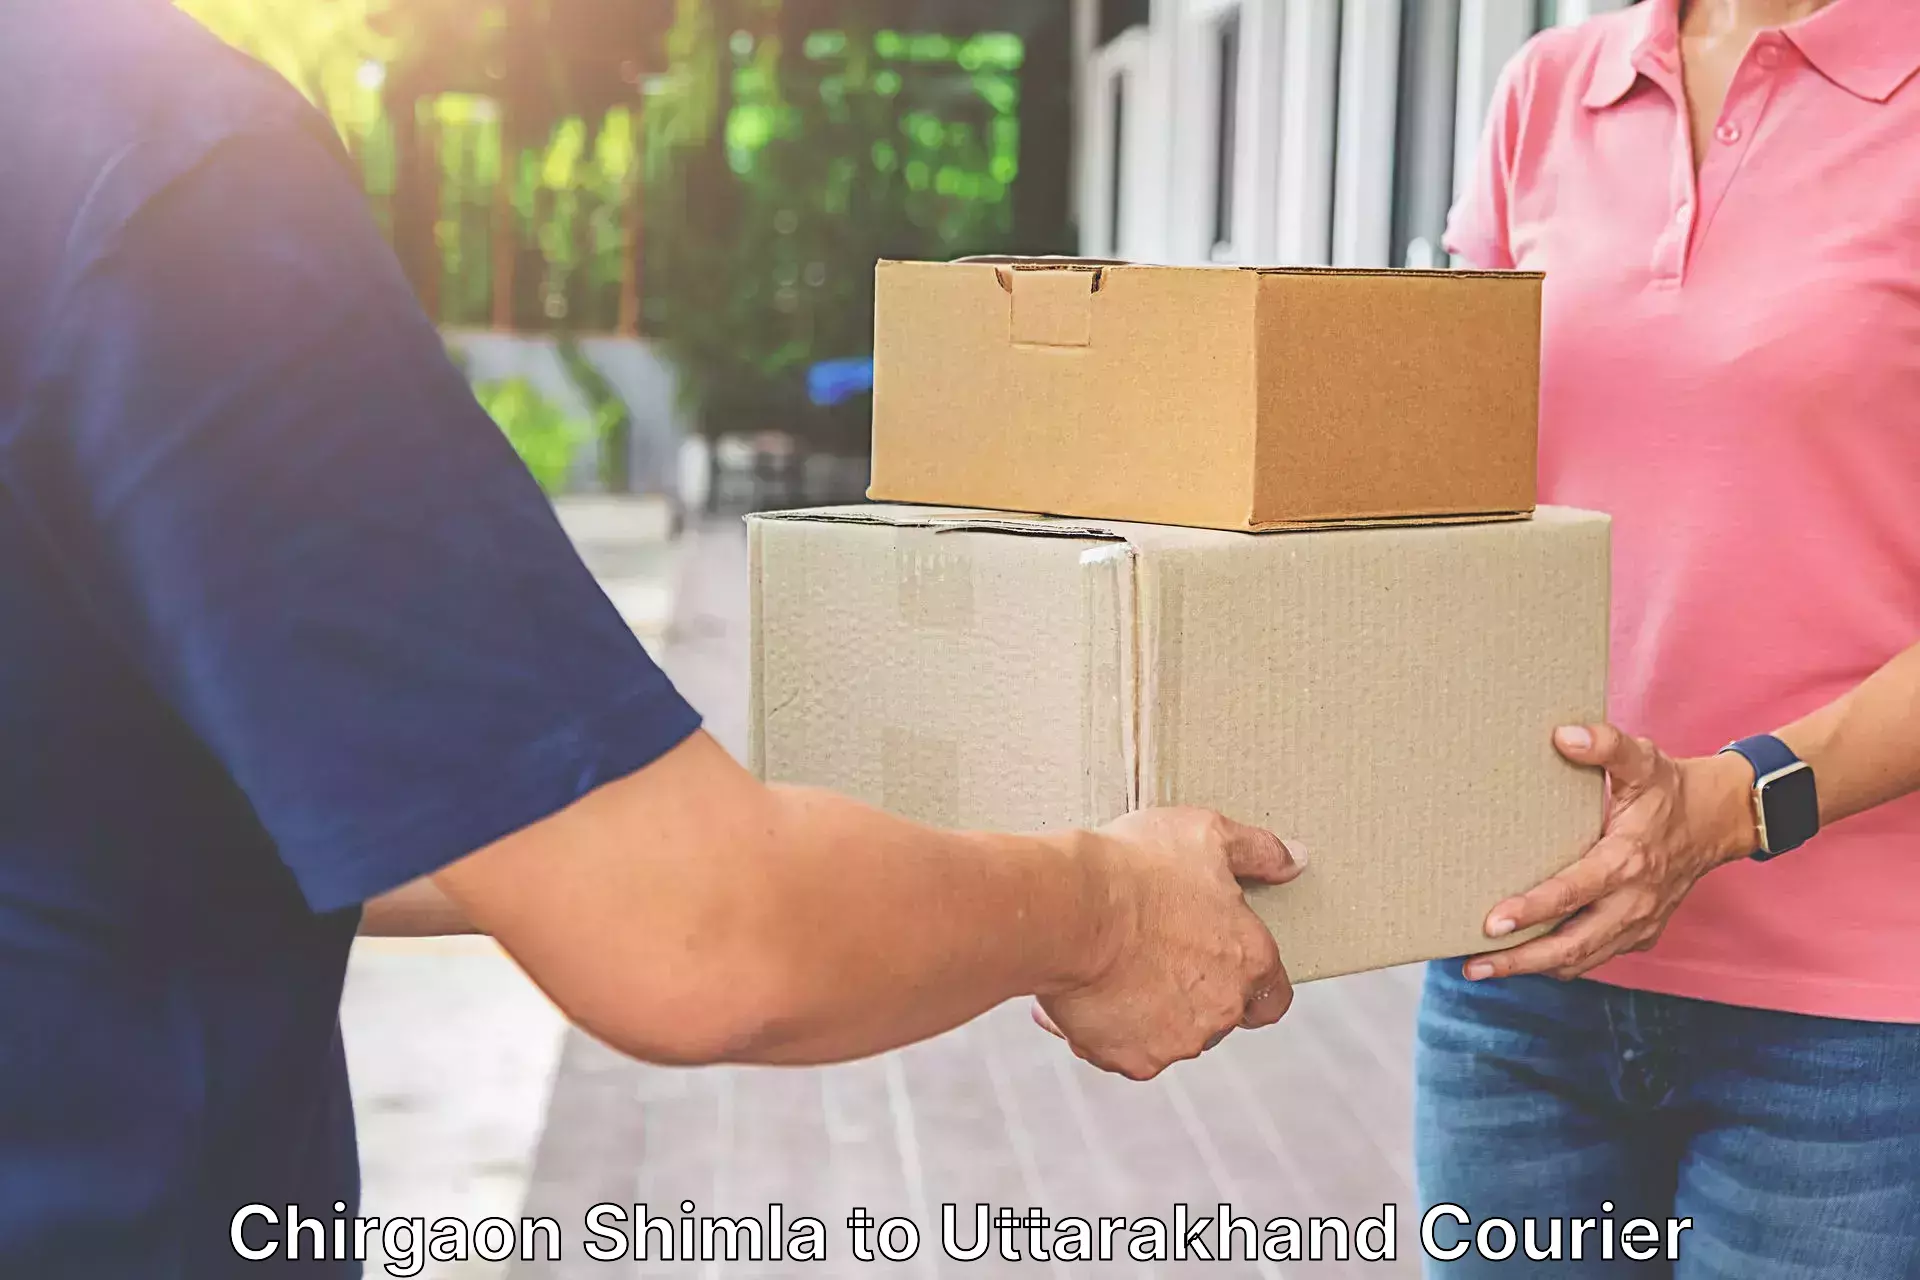 Quality courier services in Chirgaon Shimla to Haldwani